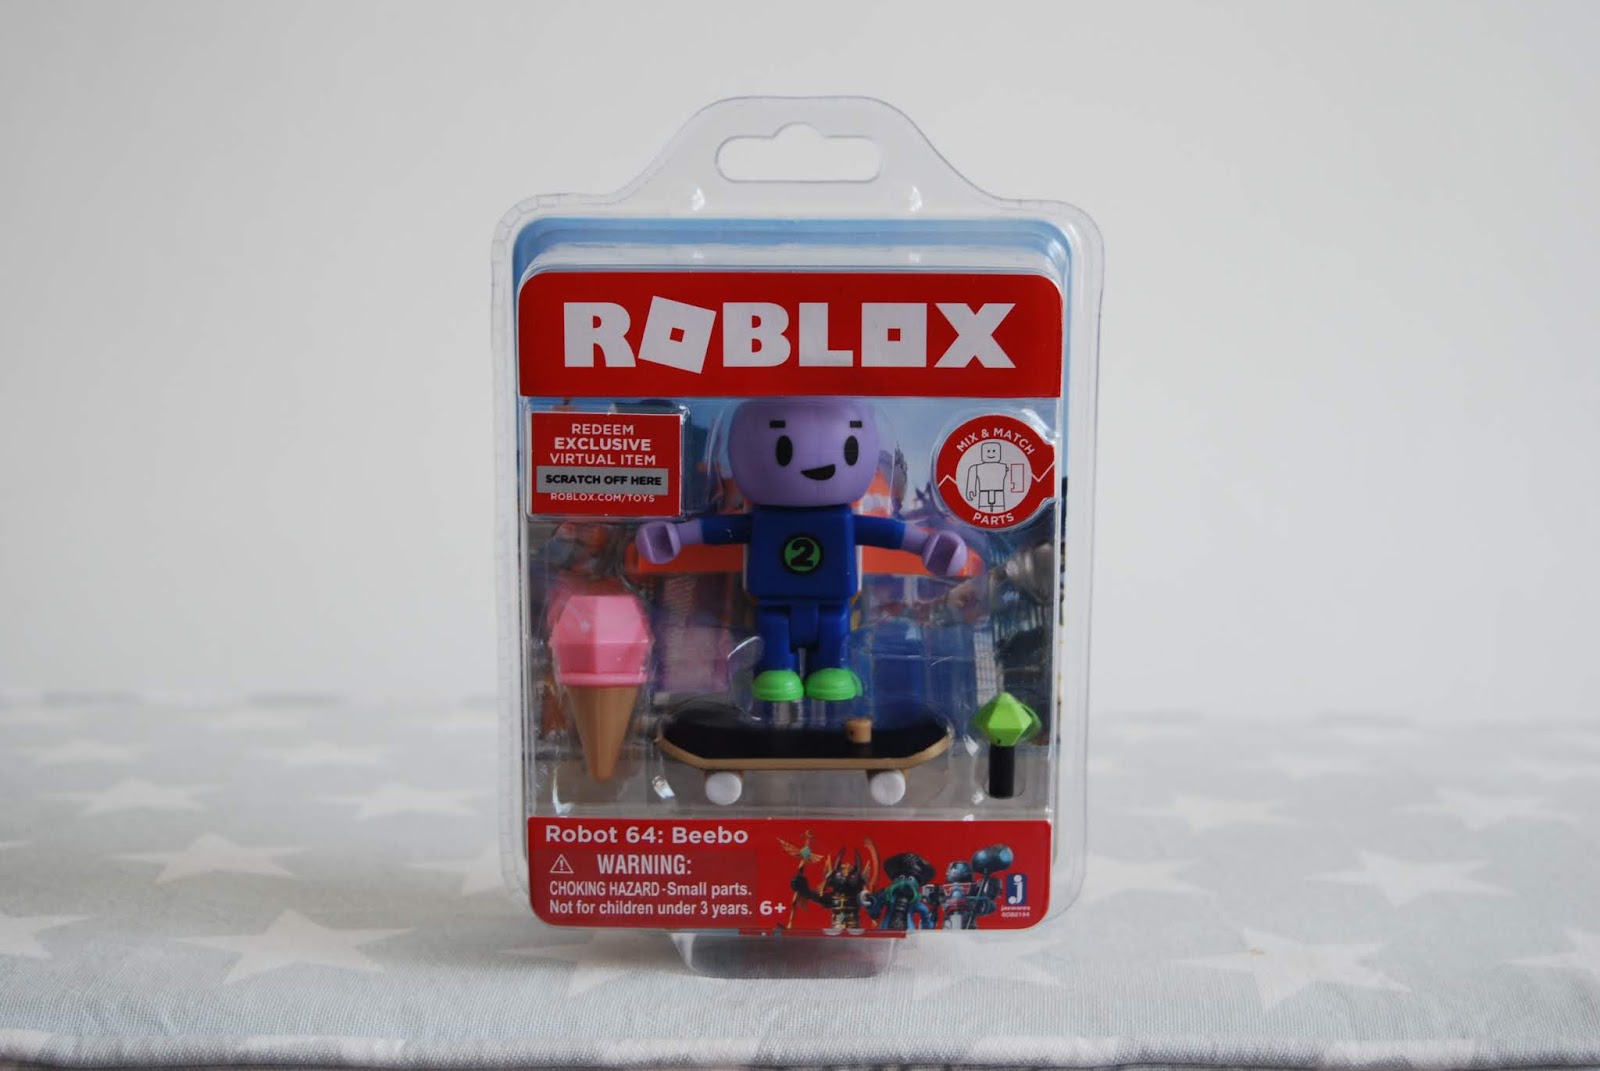 Chic Geek Diary May 2019 - roblox mystery figures series 6 assortment roblox action figures playsets smyths toys uk